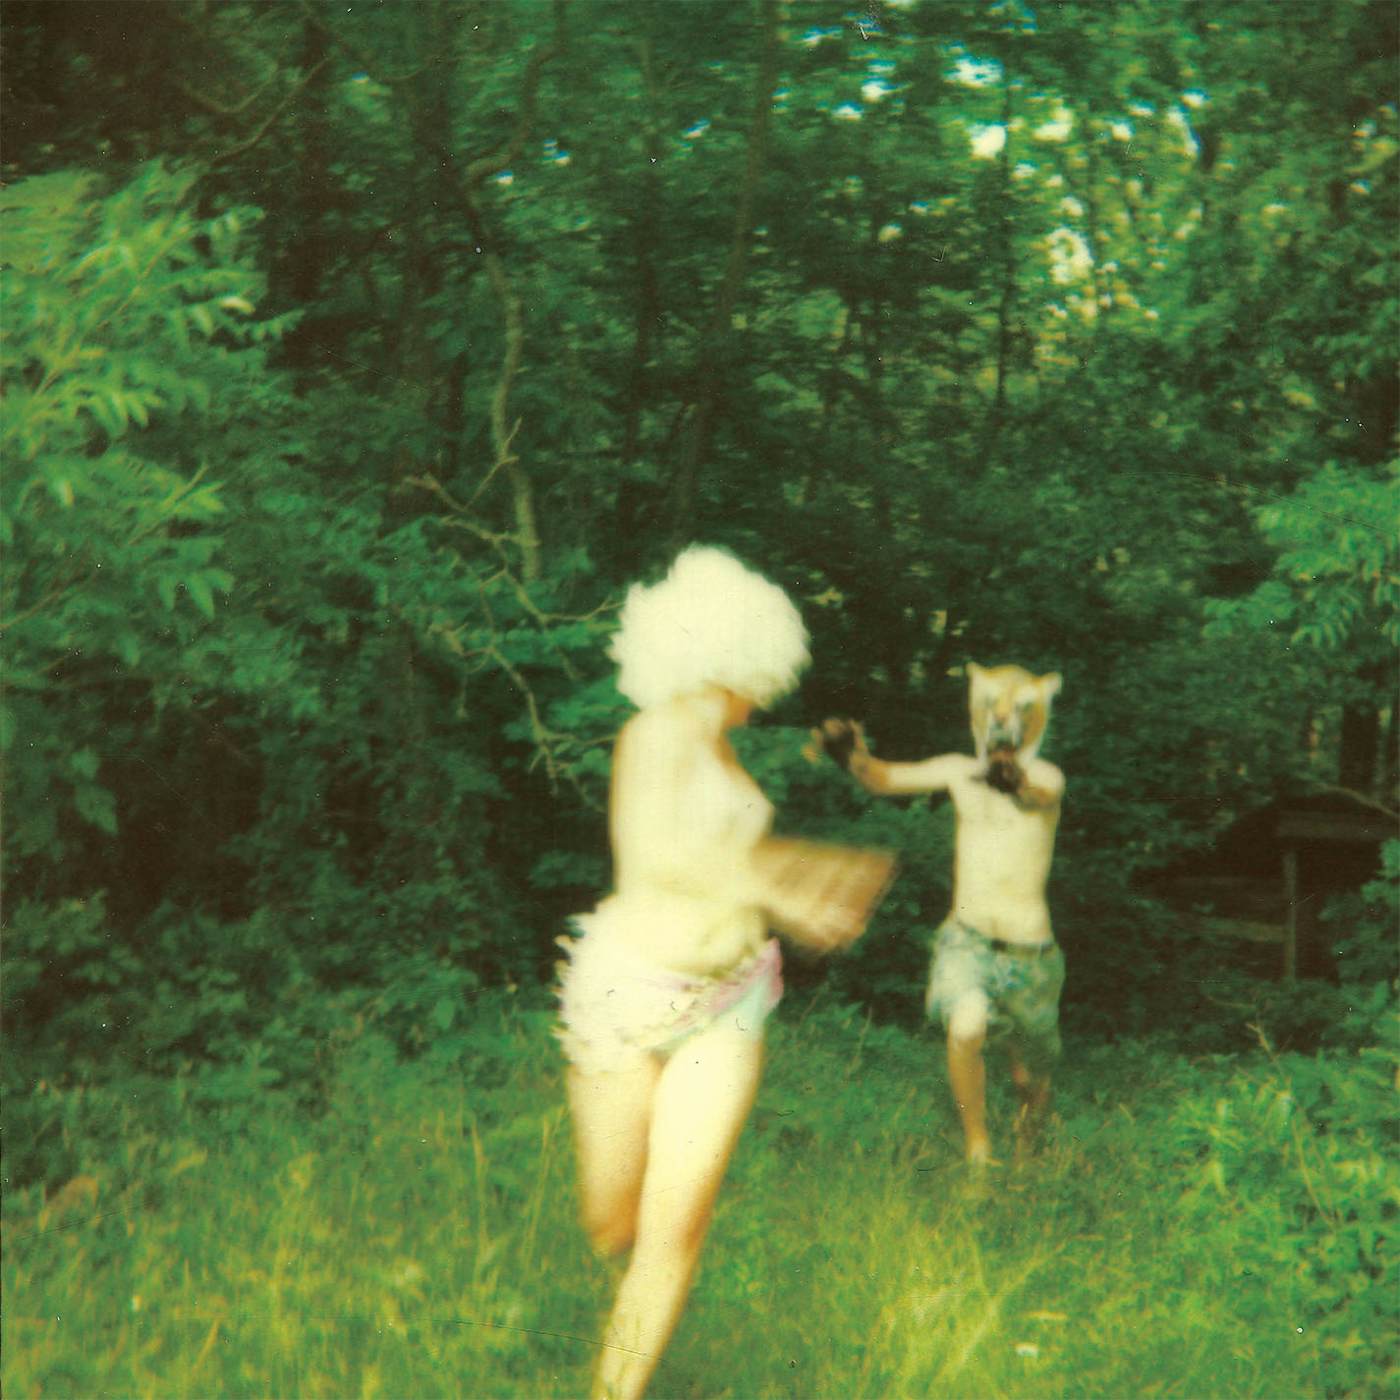 The World Is A Beautiful Place & I Am No Longer Afraid To Die HARMLESSNESS CD